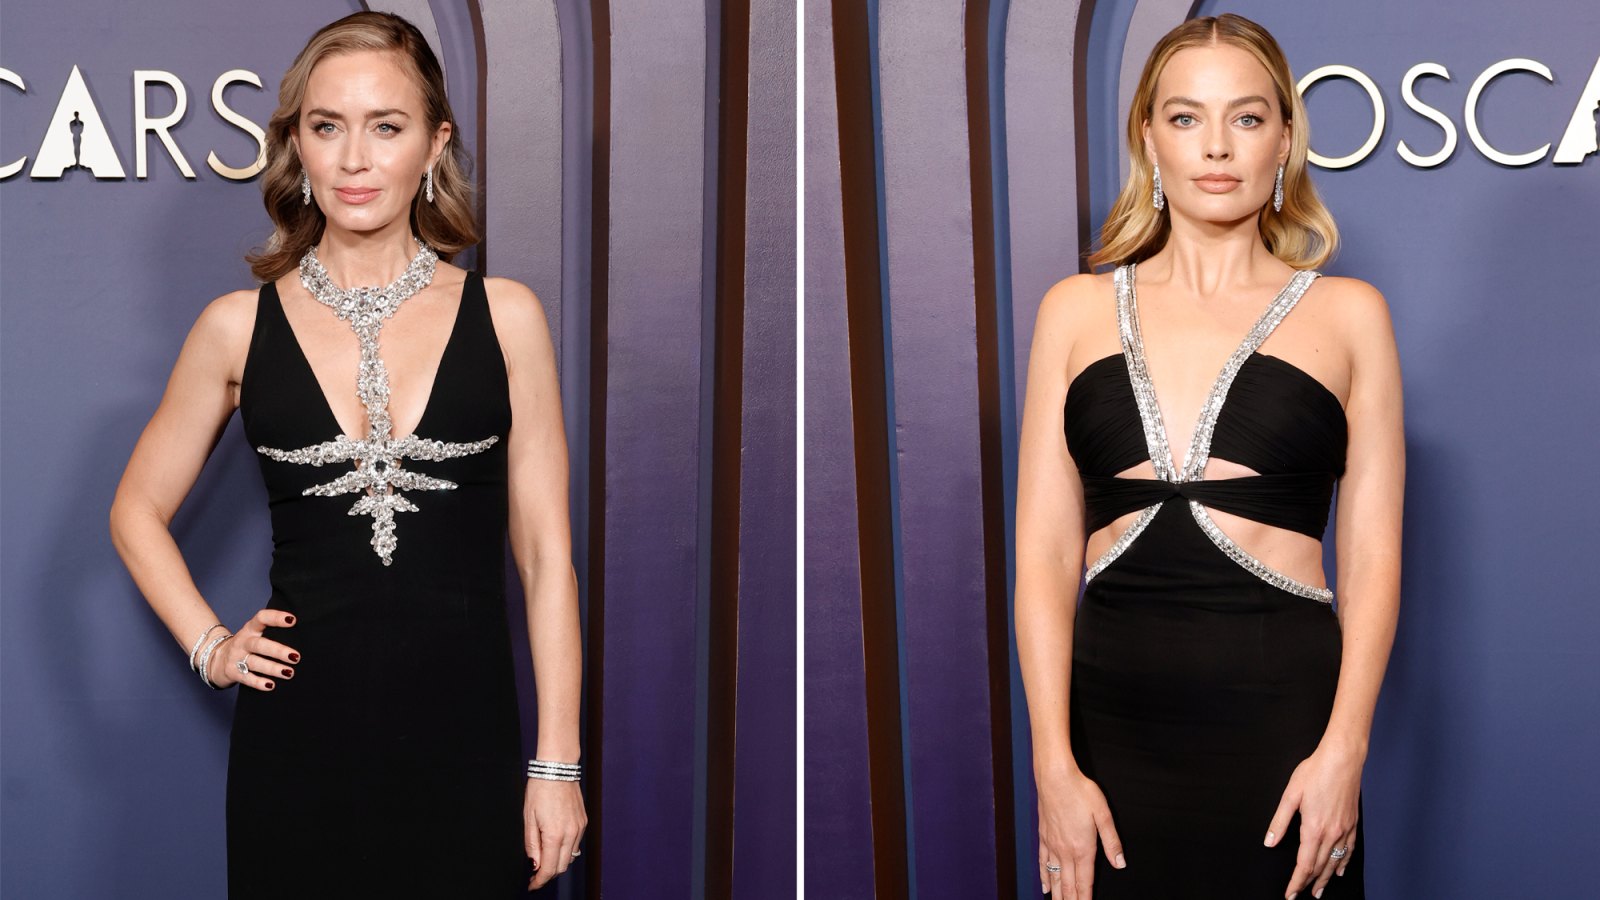 Margot Robbie and Emily Blunt Twin in Matching Black and Crystal Gowns at the Governors Awards